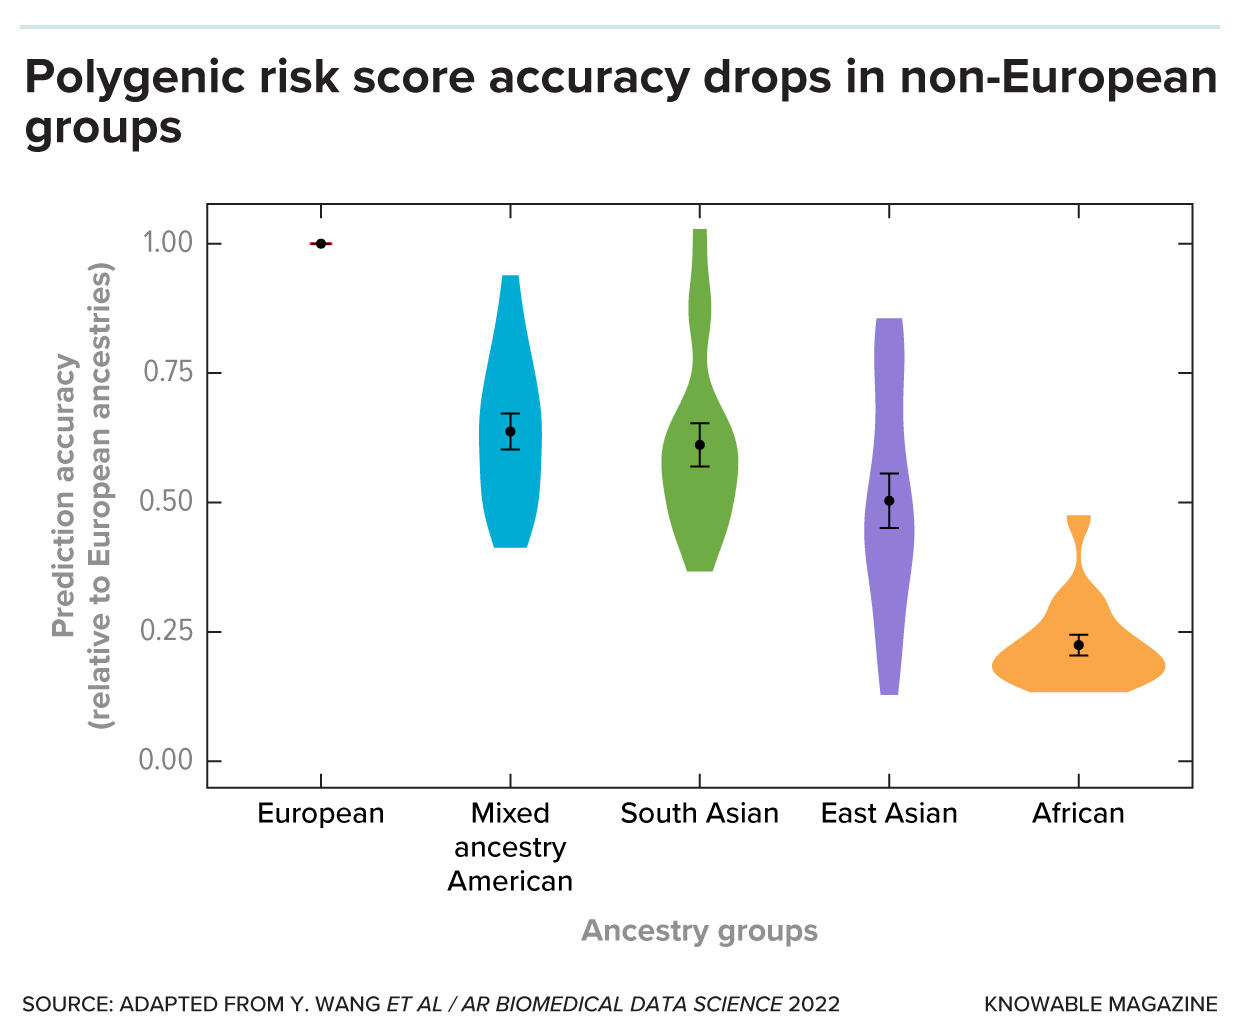 Graph lays out ancestry groups on x-axis: European, Admixed American, South Asian, East Asian, and African; and prediction accuracy on y-axis. Compared with score of 1.0 for Europeans, performance is between 0.5 and 0.75 for Admixed American and South Asian populations, about 0.5 for East Asians and about 0.25 for Africans.